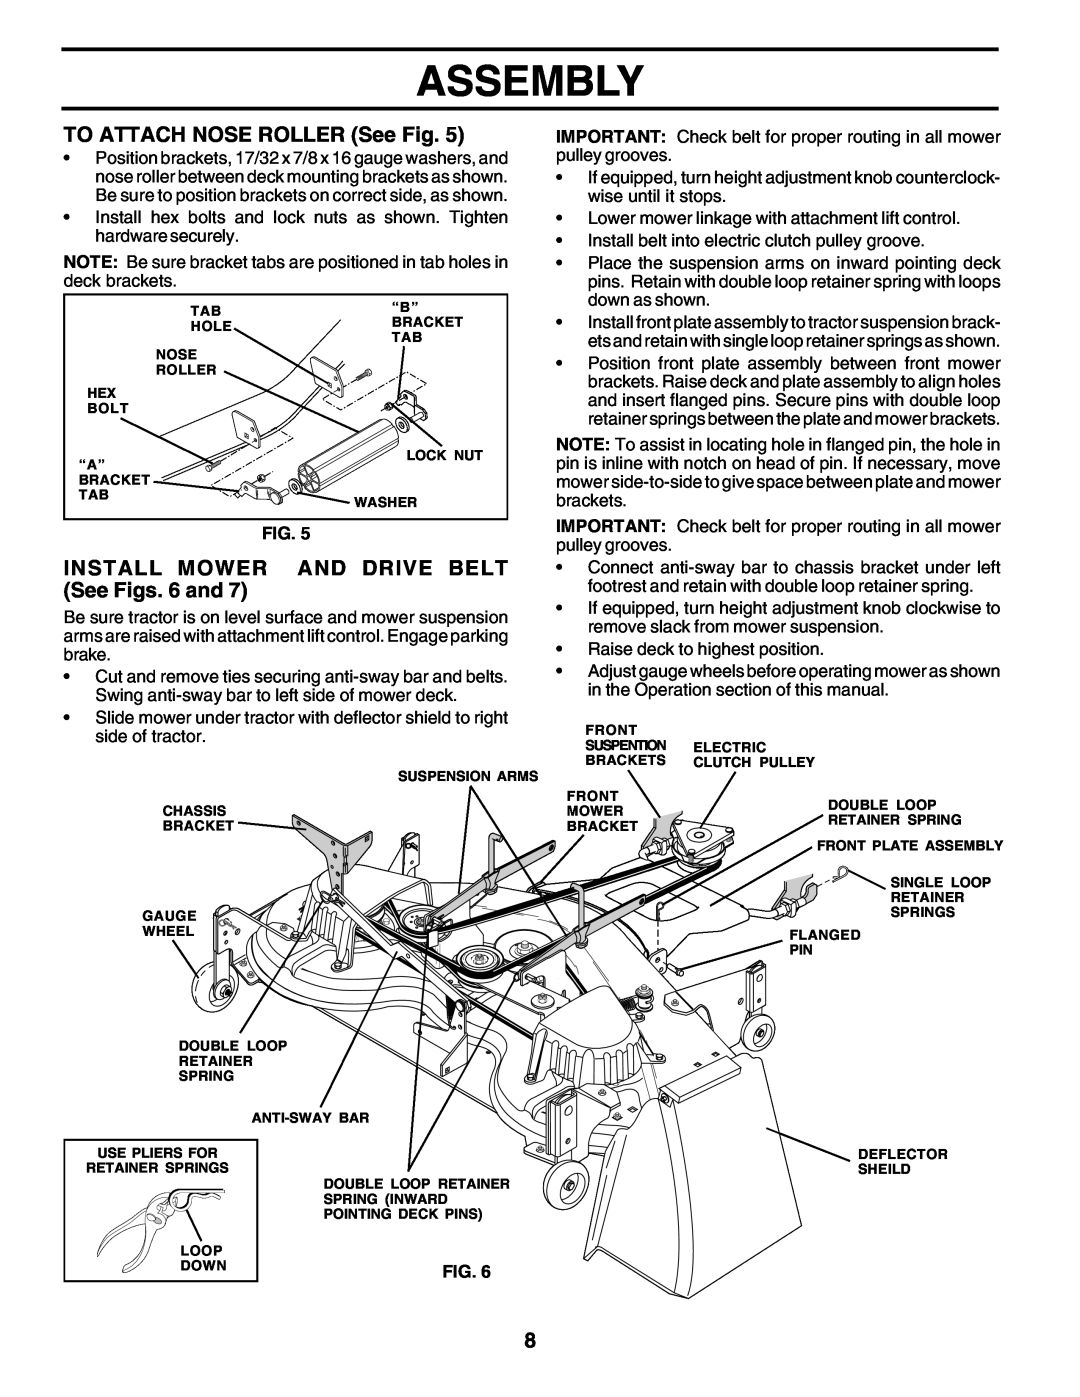 Poulan PRGT22H50D owner manual Assembly, TO ATTACH NOSE ROLLER See Fig, INSTALL MOWER AND DRIVE BELT See Figs. 6 and 